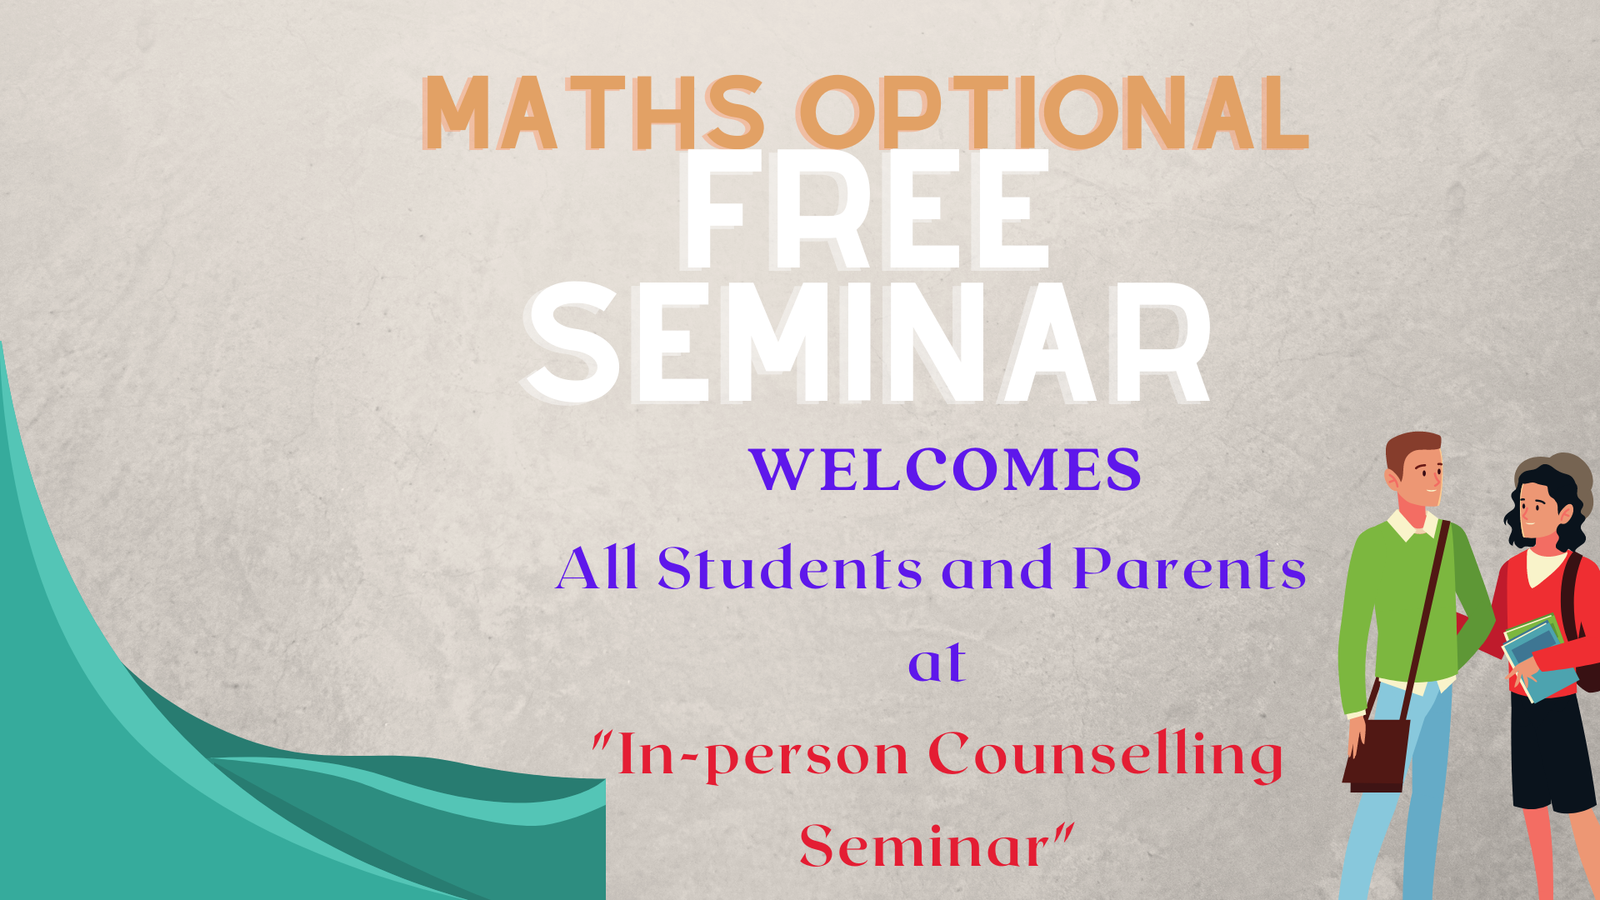 https://www.mathematicsoptional.com/uploads/blog/Free_Seminar_on_Maths_Optional_for_for_UPSC,_IAS,_IFoS(IFS),_Civil_Services_Mains_Exams.png